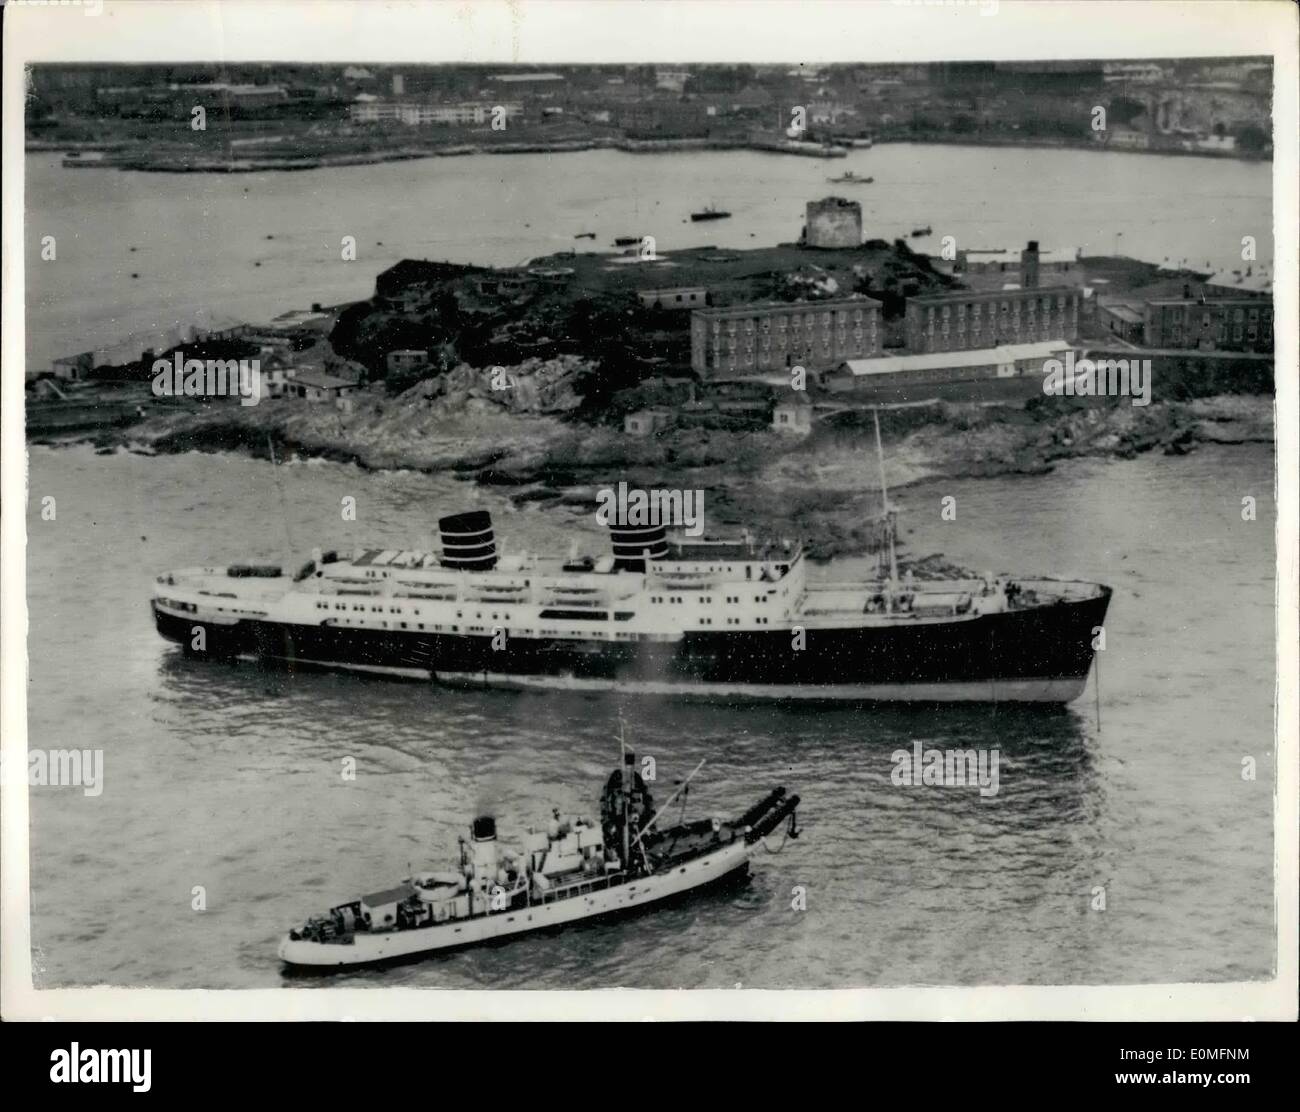 Mar. 03, 1955 - Norwegian Liner Aground Off Plymouth Hoe.. As Seen From The Air.. Never before has a liner come so close to Plymouth Hoe.. So close, in fact, that the 6,269 ton ''Venus'' is on the rocks. Twice yesterday tugs tried to refloat her. This morning's attempt left ''Venus'' as seen in this picture from the air.. Five thousand people watched as tugs tried again last night - the liner lifted but remained fast on the rocks.. Heavy gear and cargo is being removed to give her a better chance of being refloated at the next high tide. Stock Photo